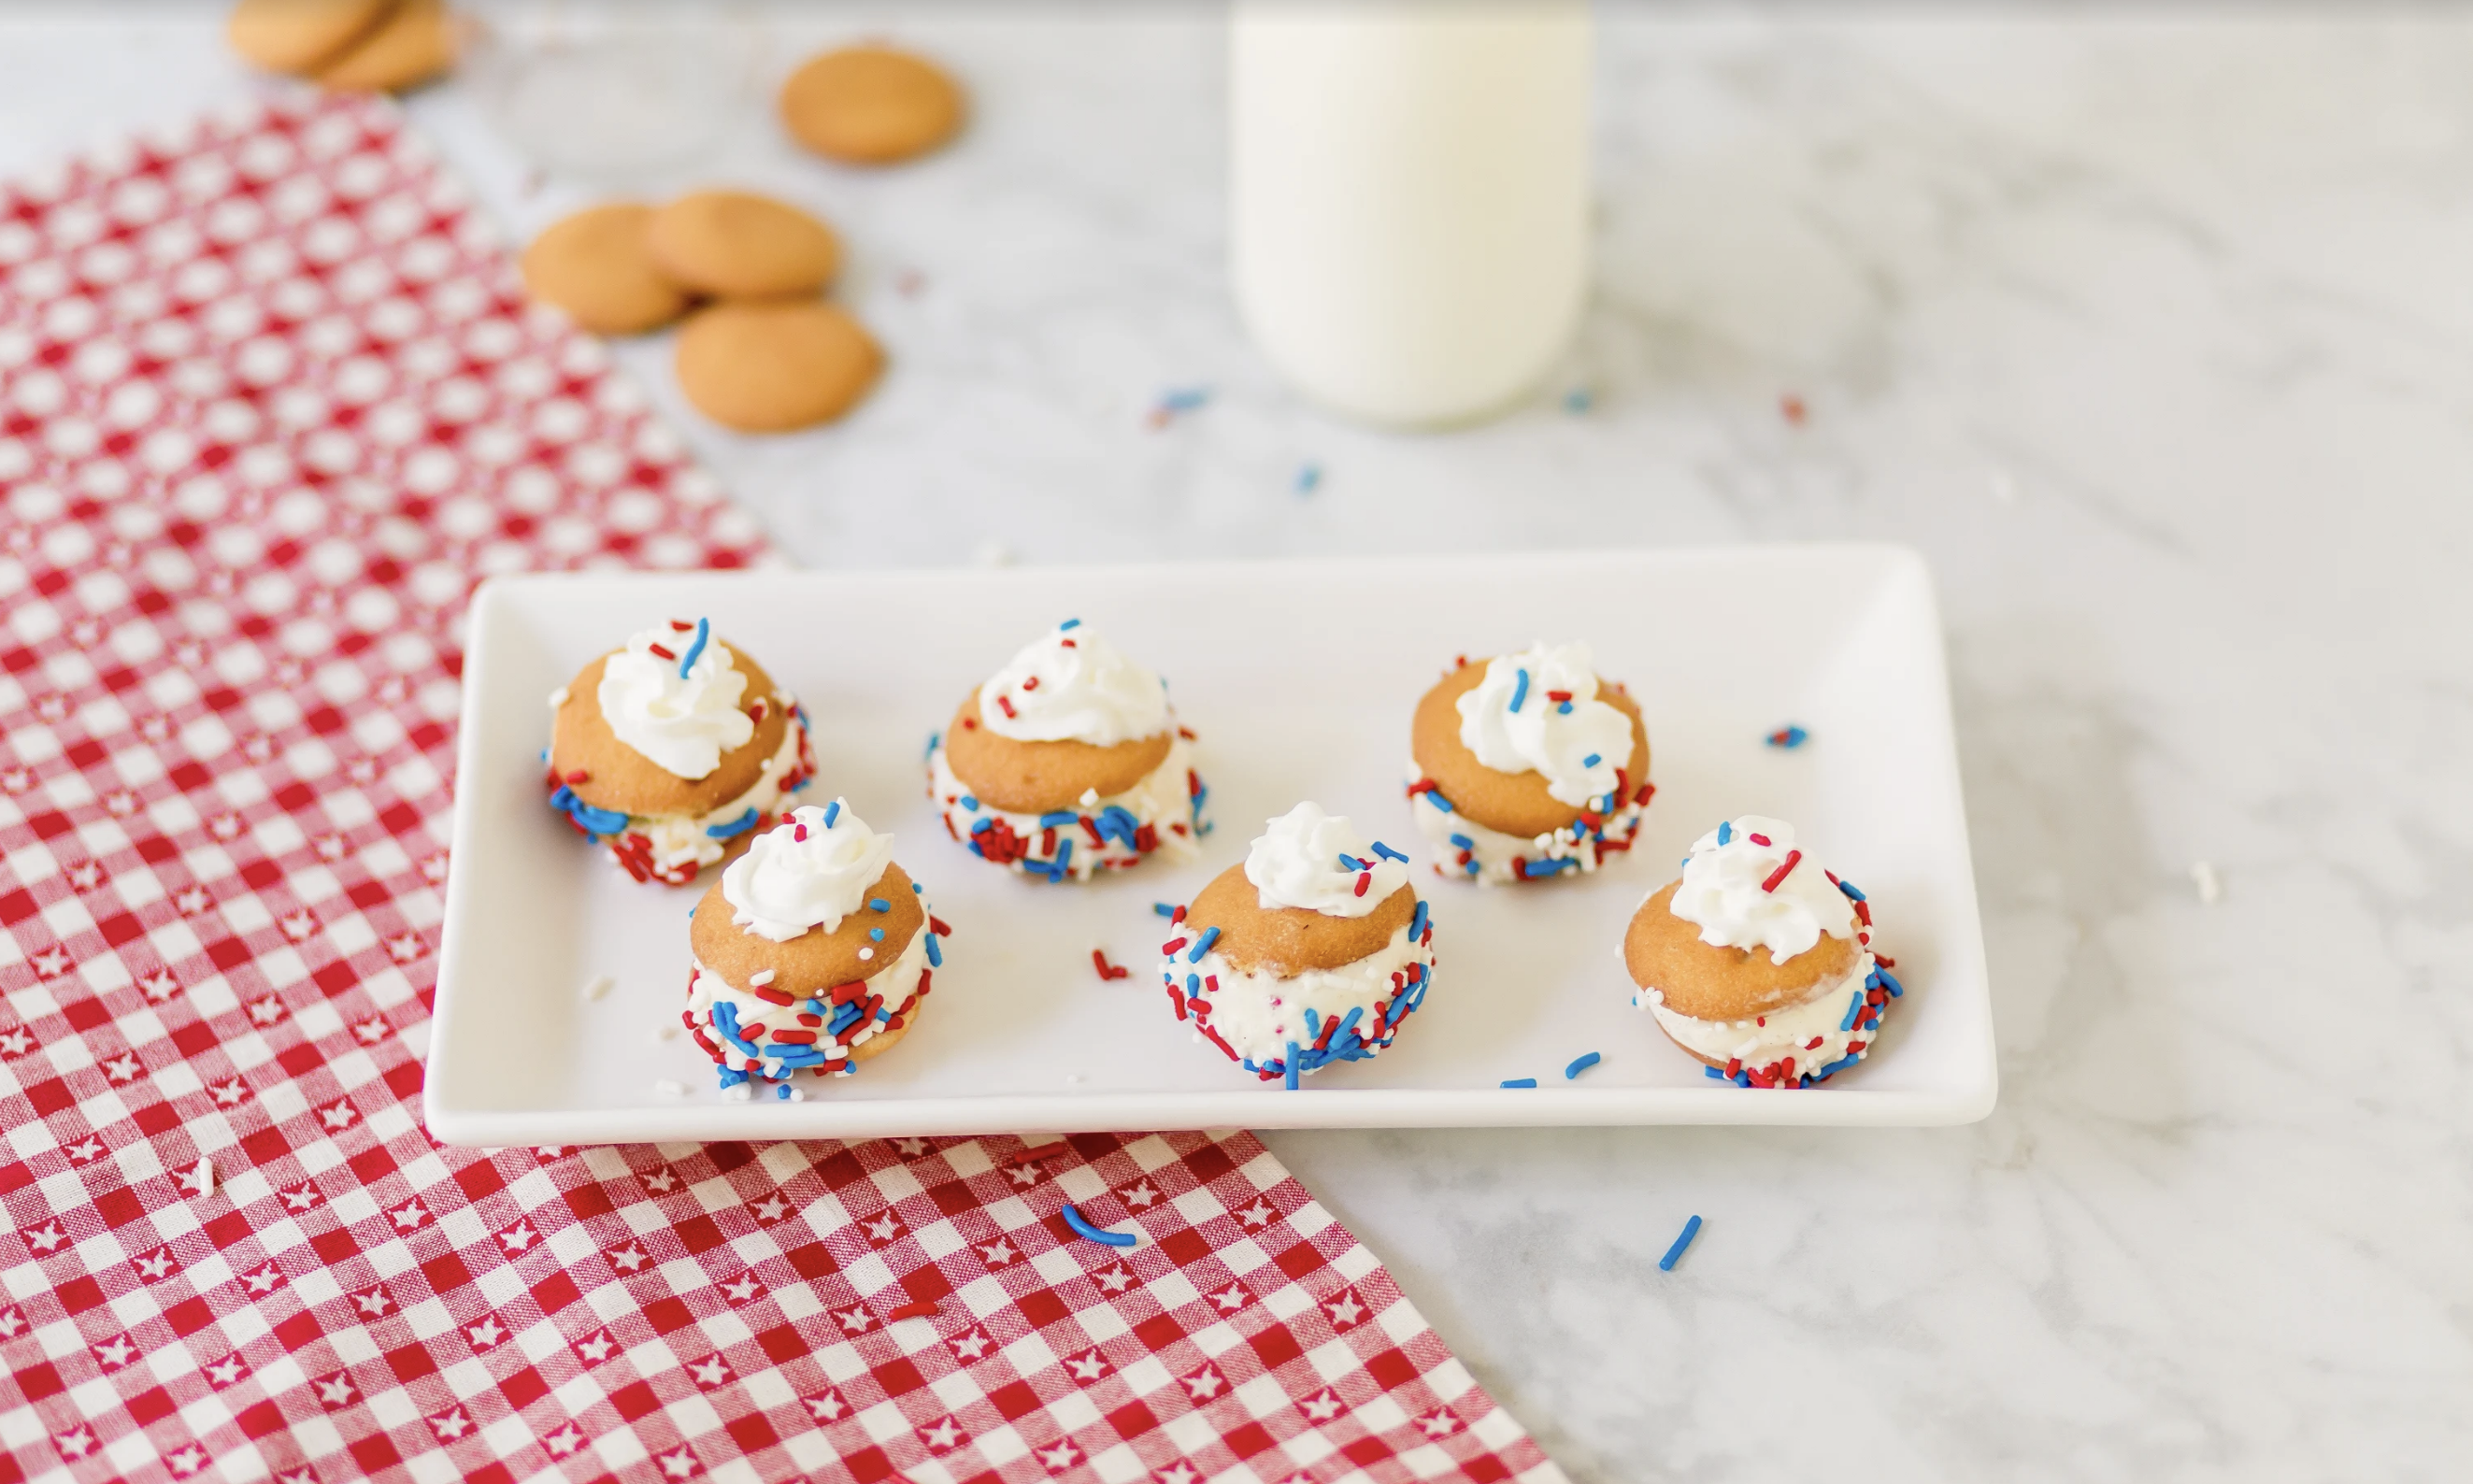 Patriotic, delicious and refreshing, these Red, White and Blue Mini Ice Cream Sandwiches with NILLA Wafers are the perfect summer snacks or desserts for your next summer party!